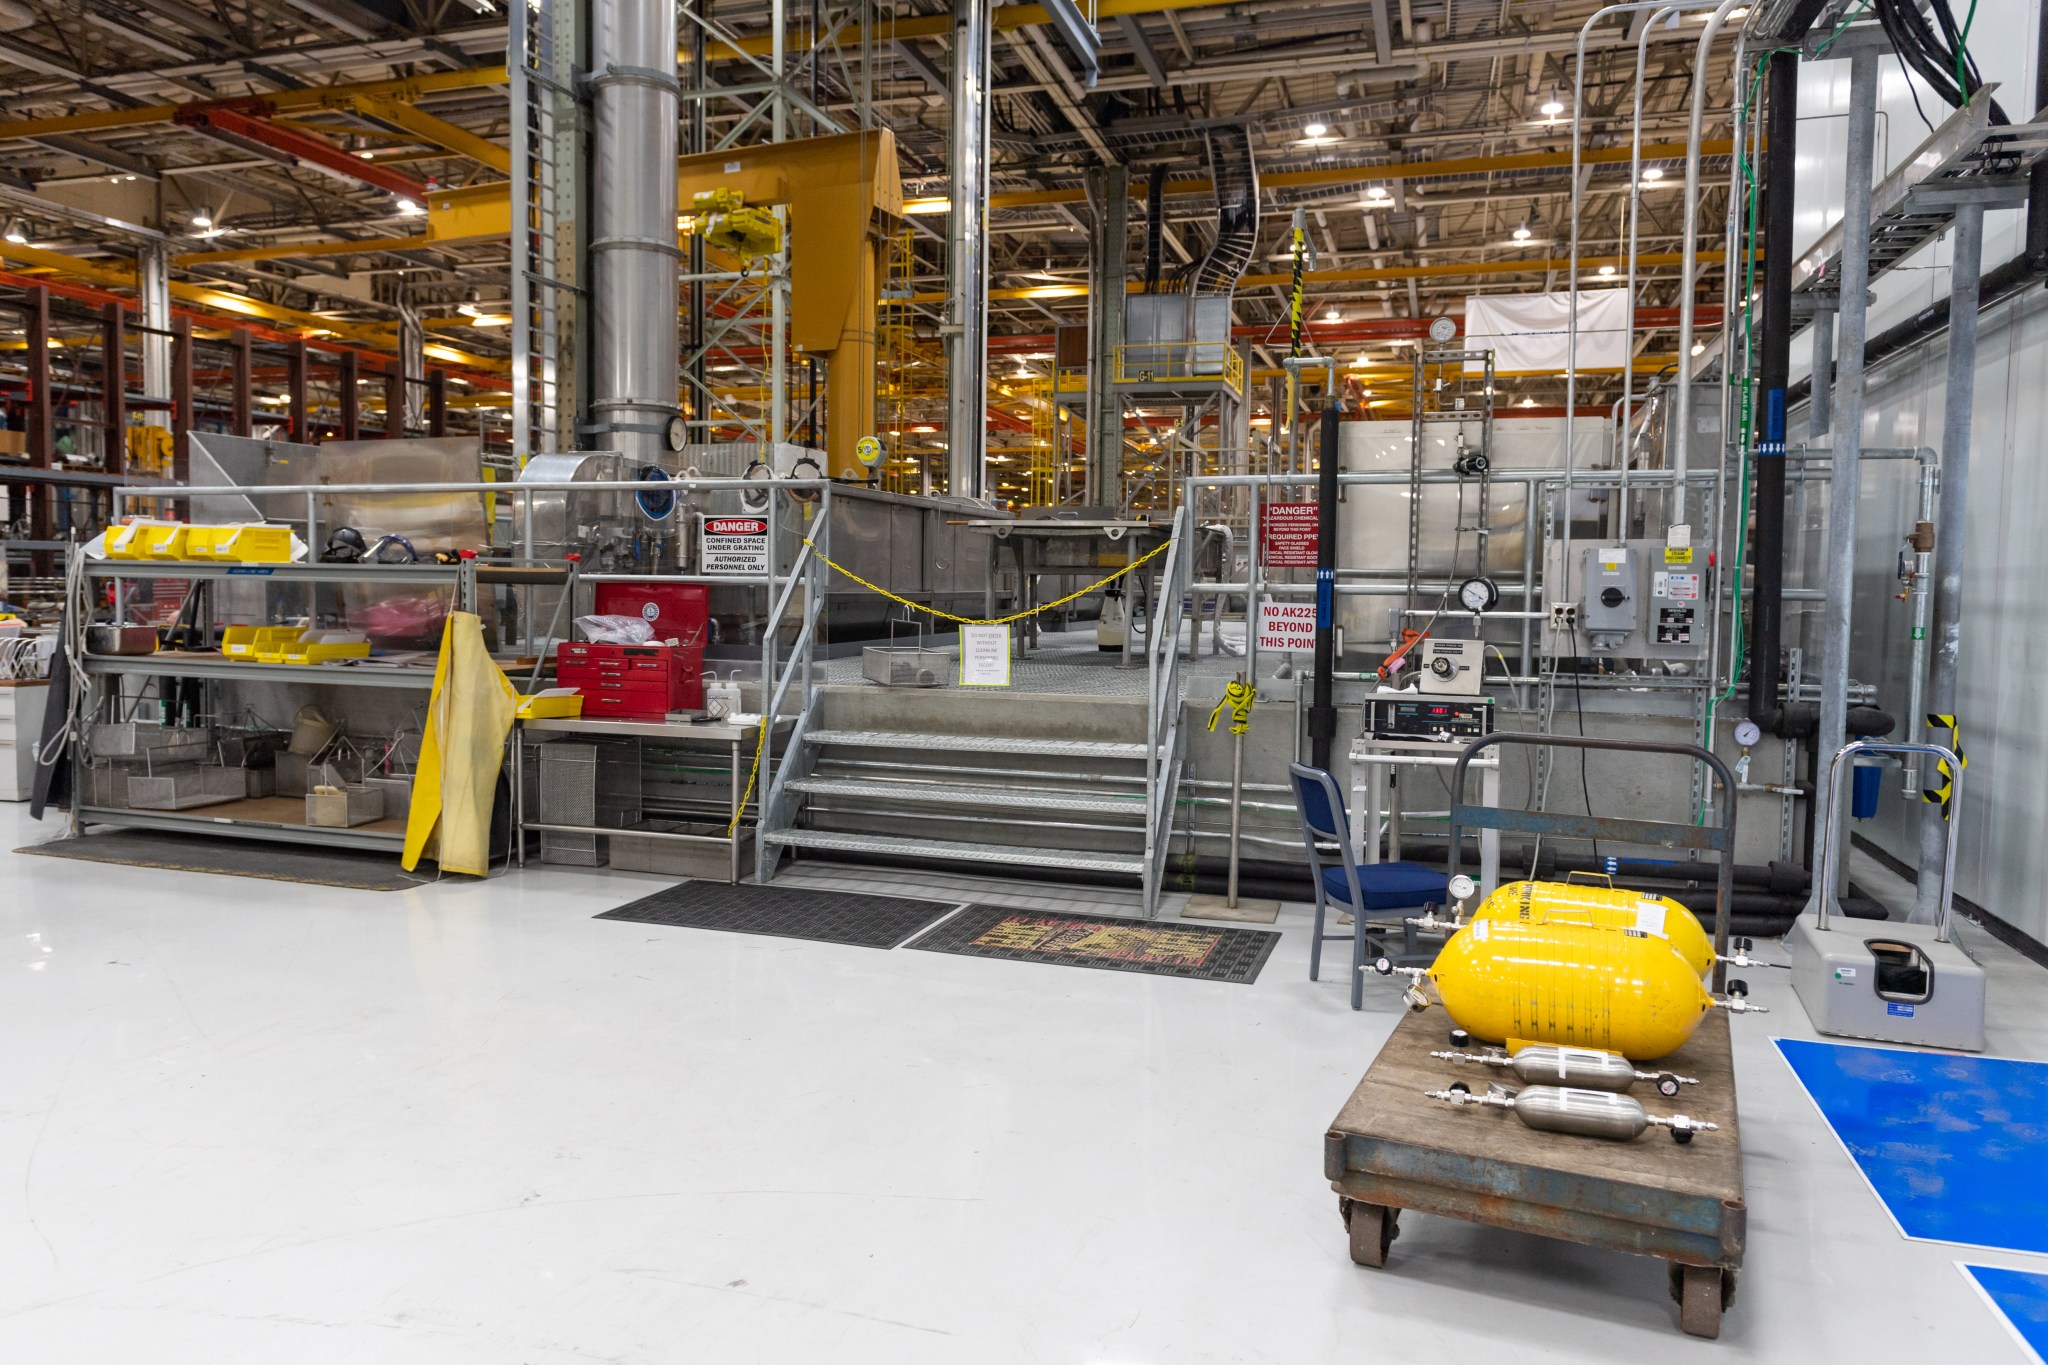 Component Processing Facility located in Building 103 at the Michoud Assembly Facility.